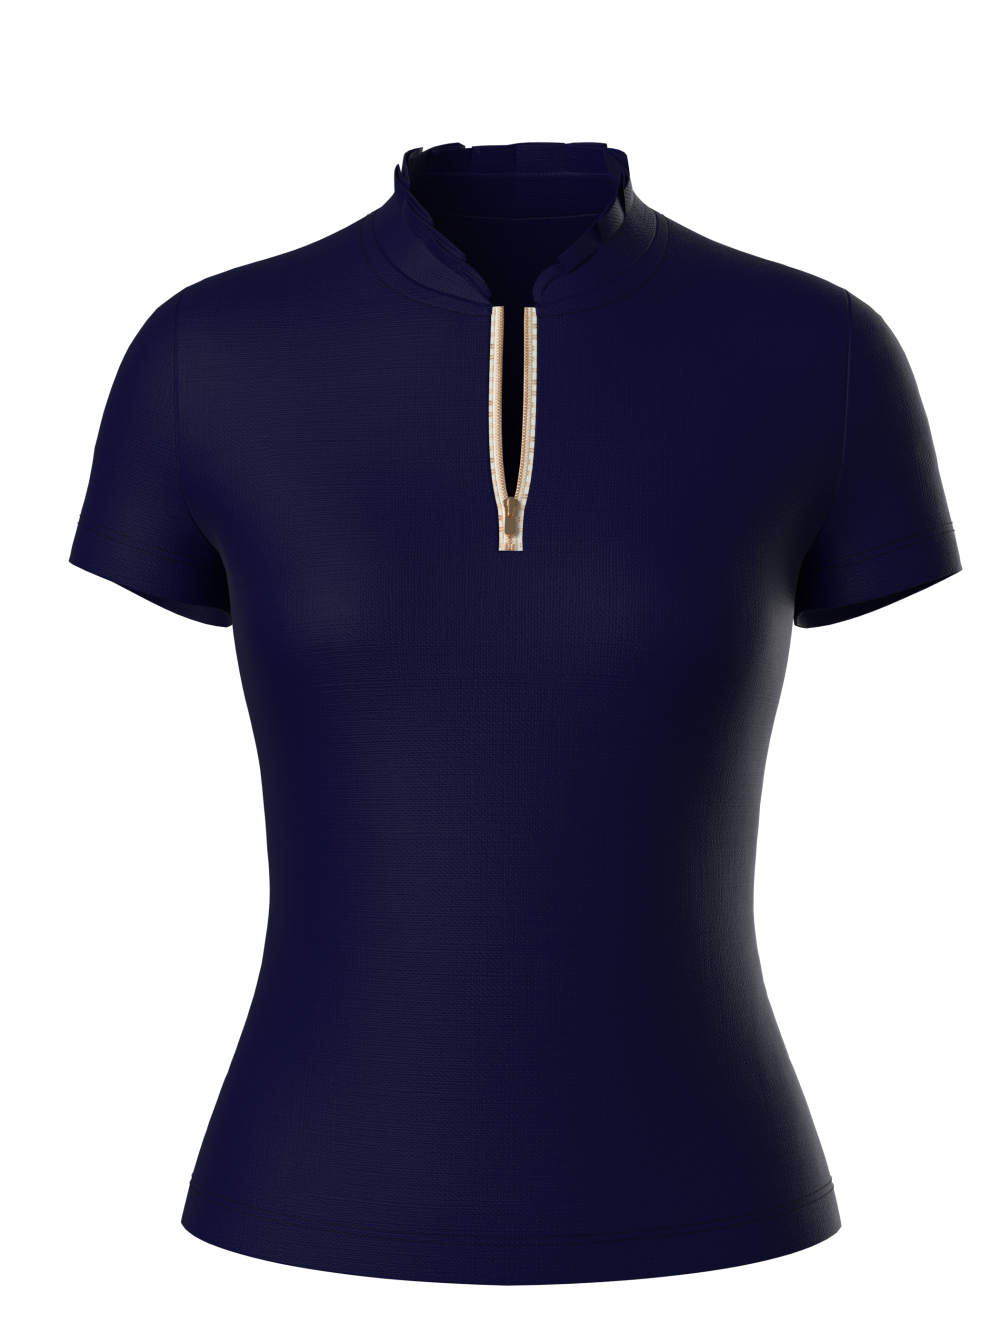 Chambery_Signature Golf Shirt with short sleeves